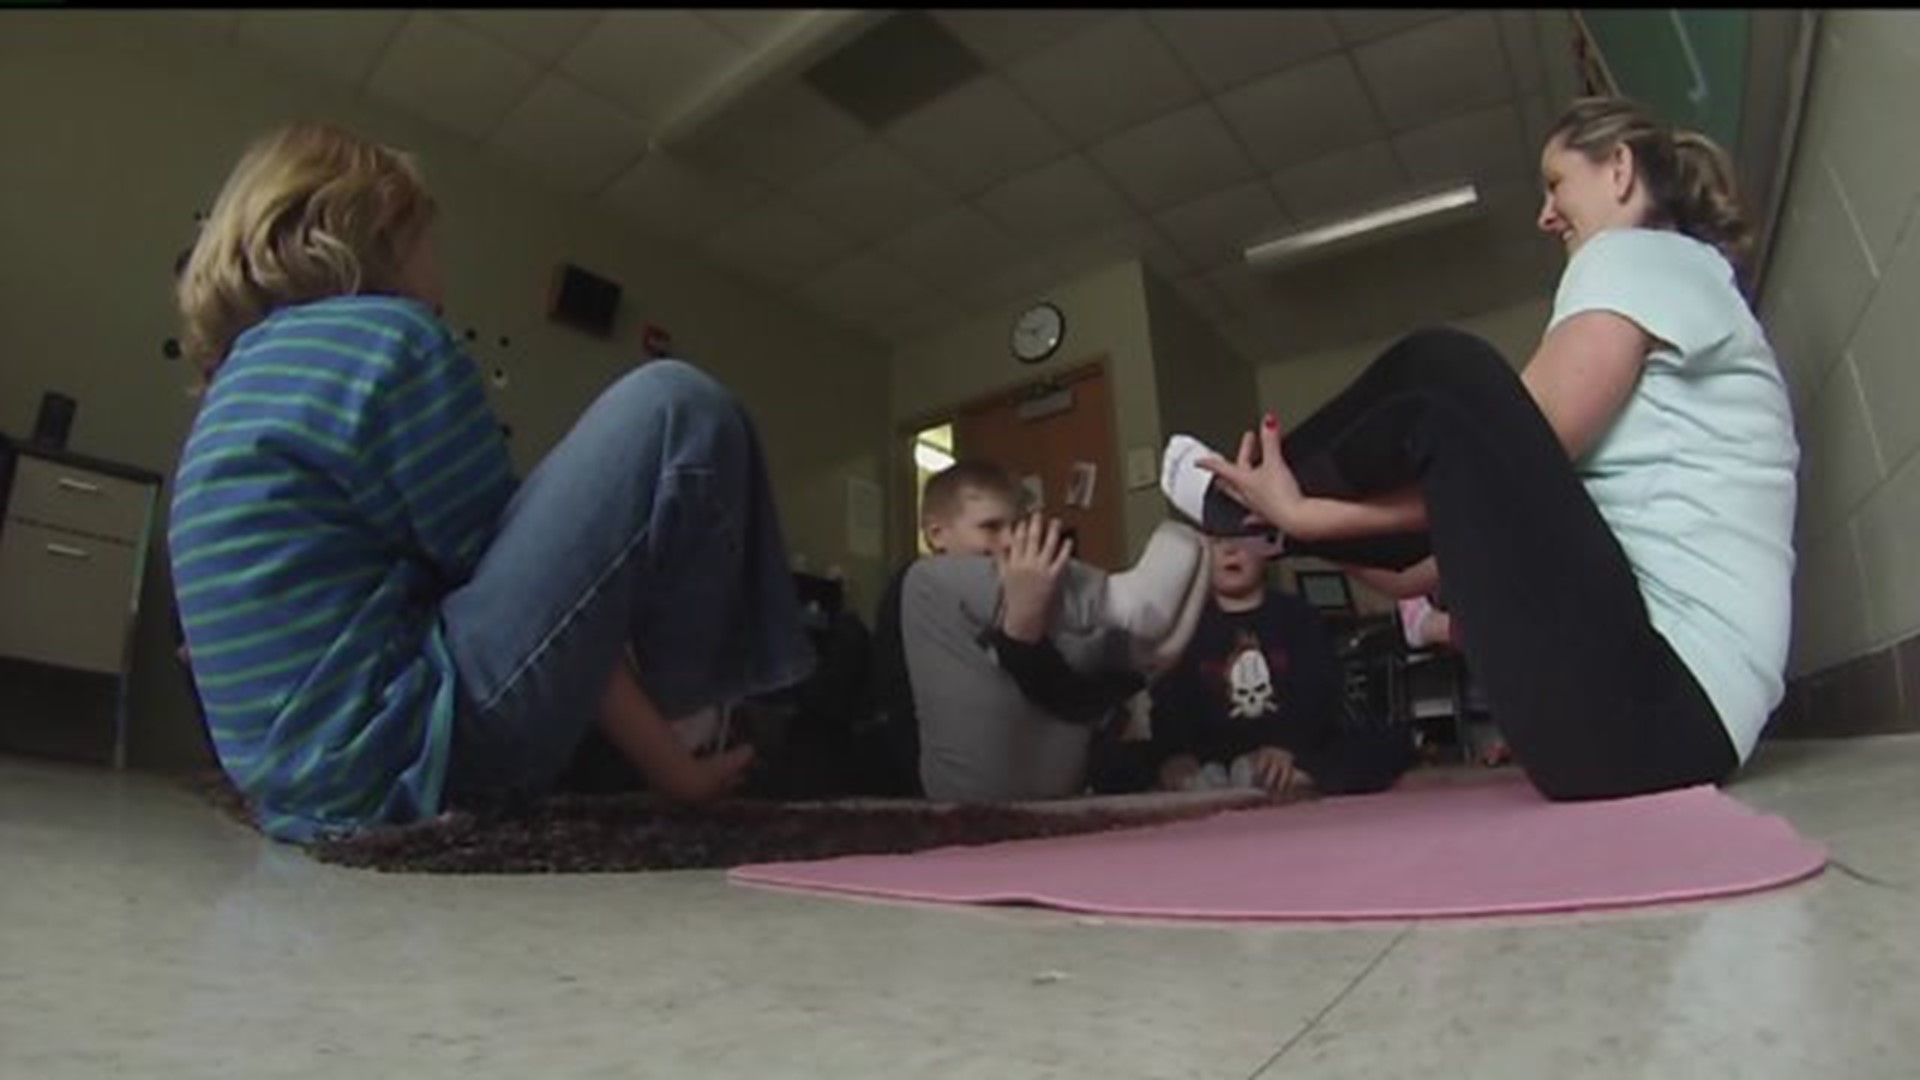 School offers Yoga during recess